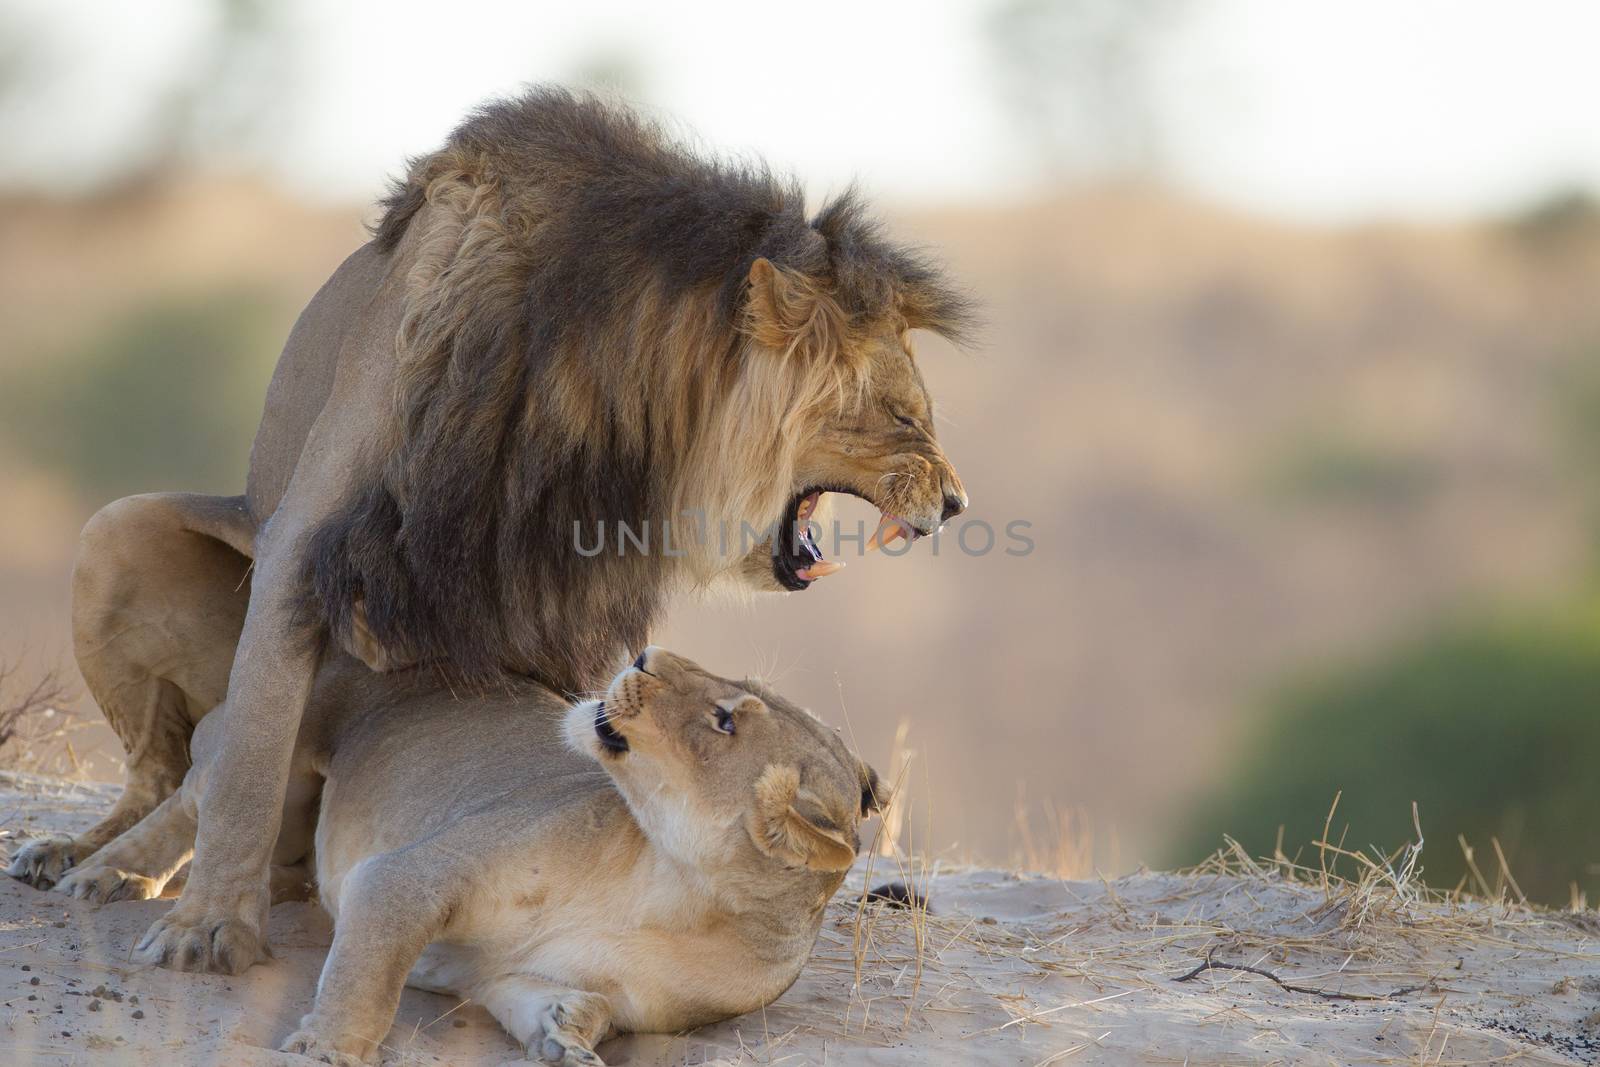 Lions mating in the wilderness of Africa